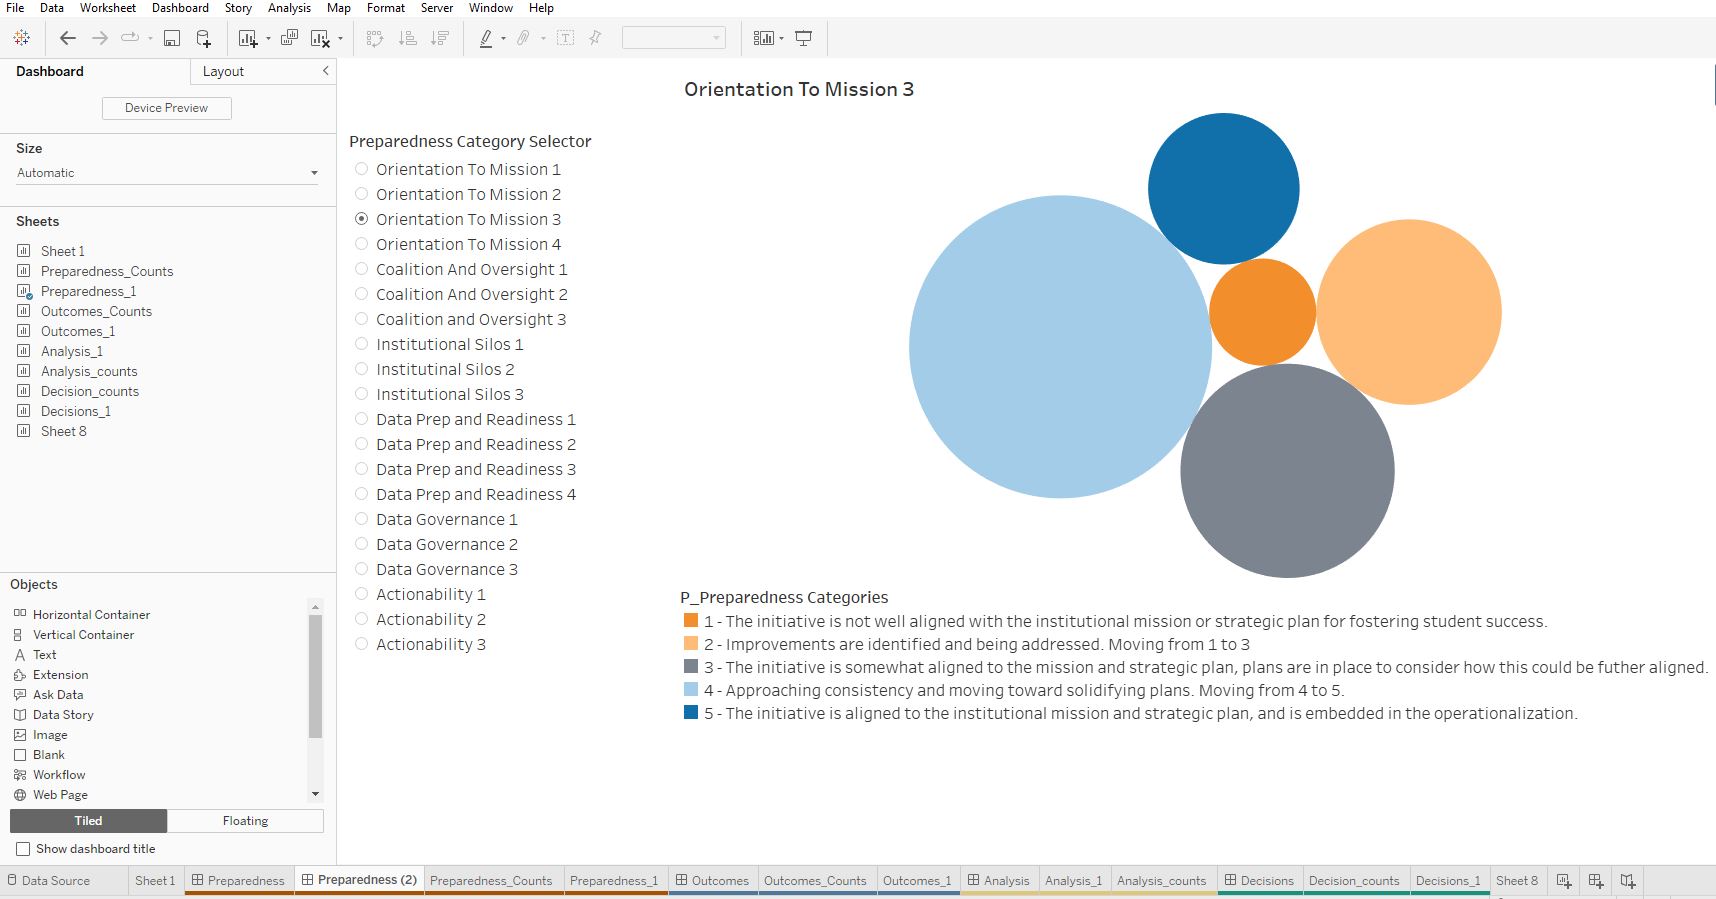 Screen shot of a dashboard showing responses to one question in the SSA Rubric. Responses are show in a set of five, colored bubbles that are sized proportionally to represent the proportion of responses that were given for each rubric level. 